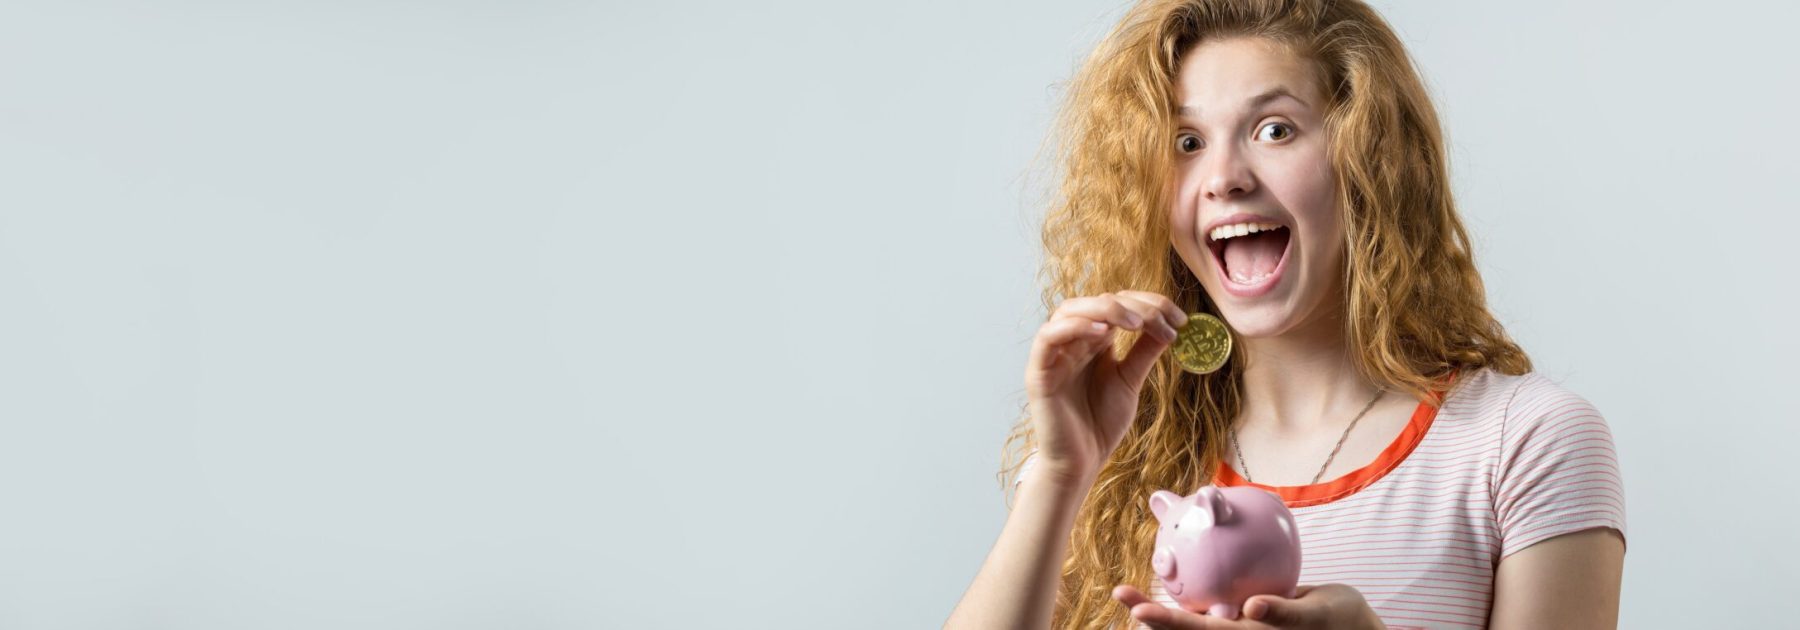 Young,Red-haired,Curly,Girl,Over,White,Background,Holding,Piggy,Bank